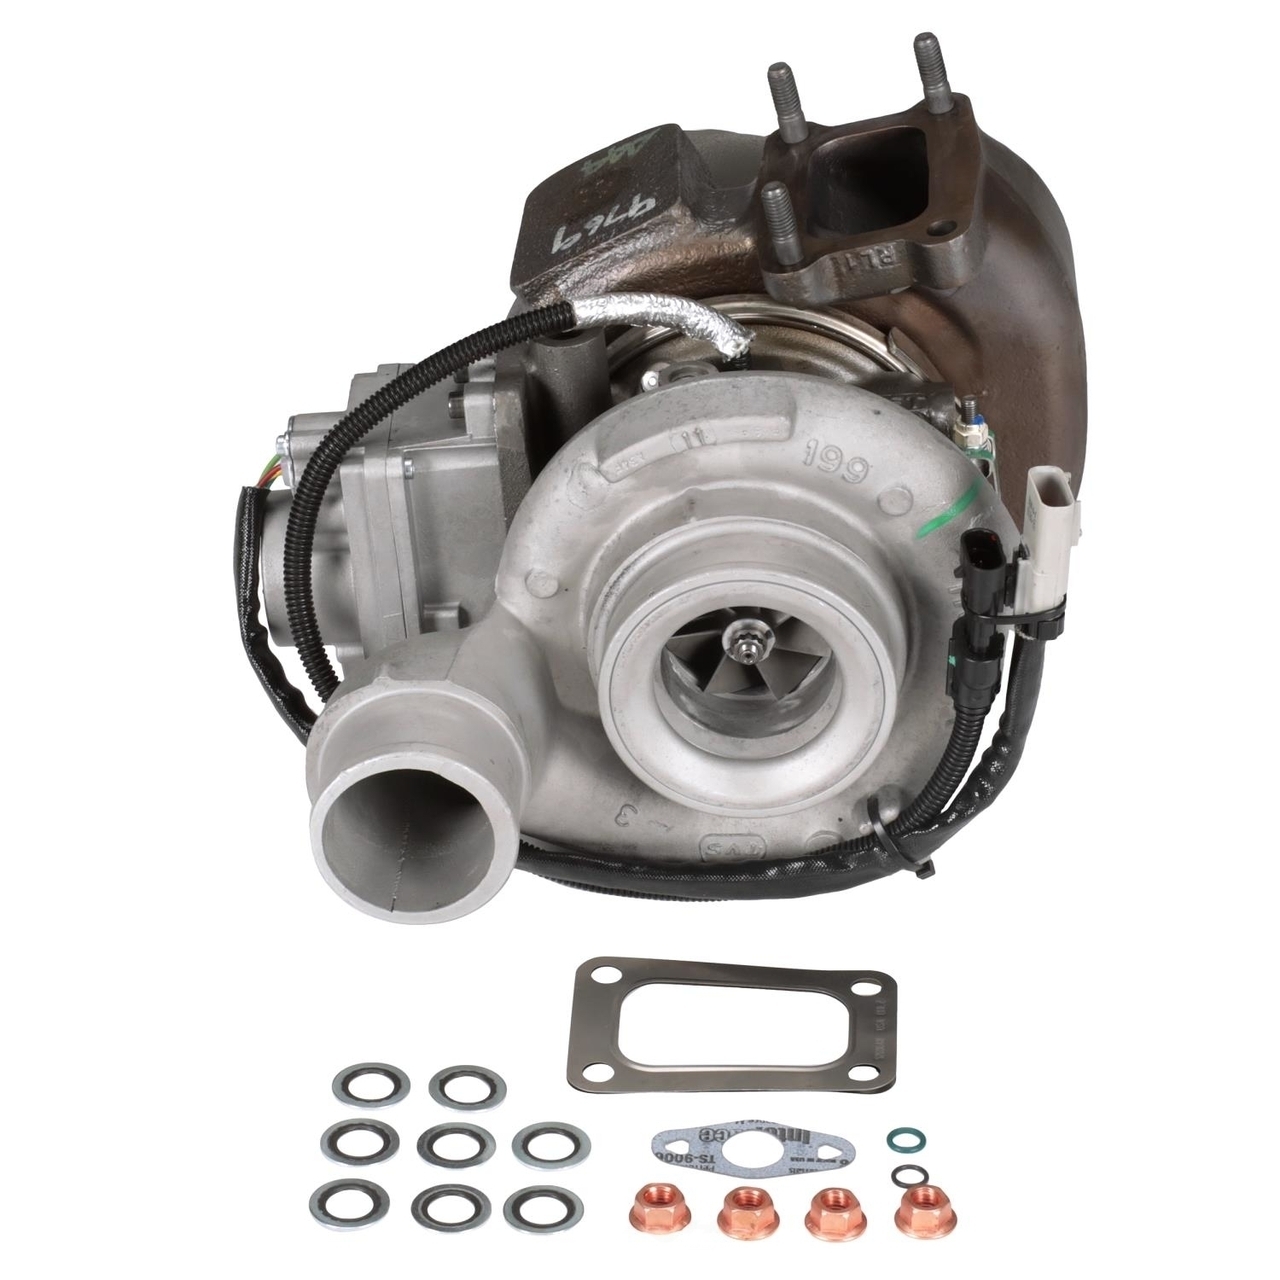 Standard Motor Products TBC-521 Turbocharger